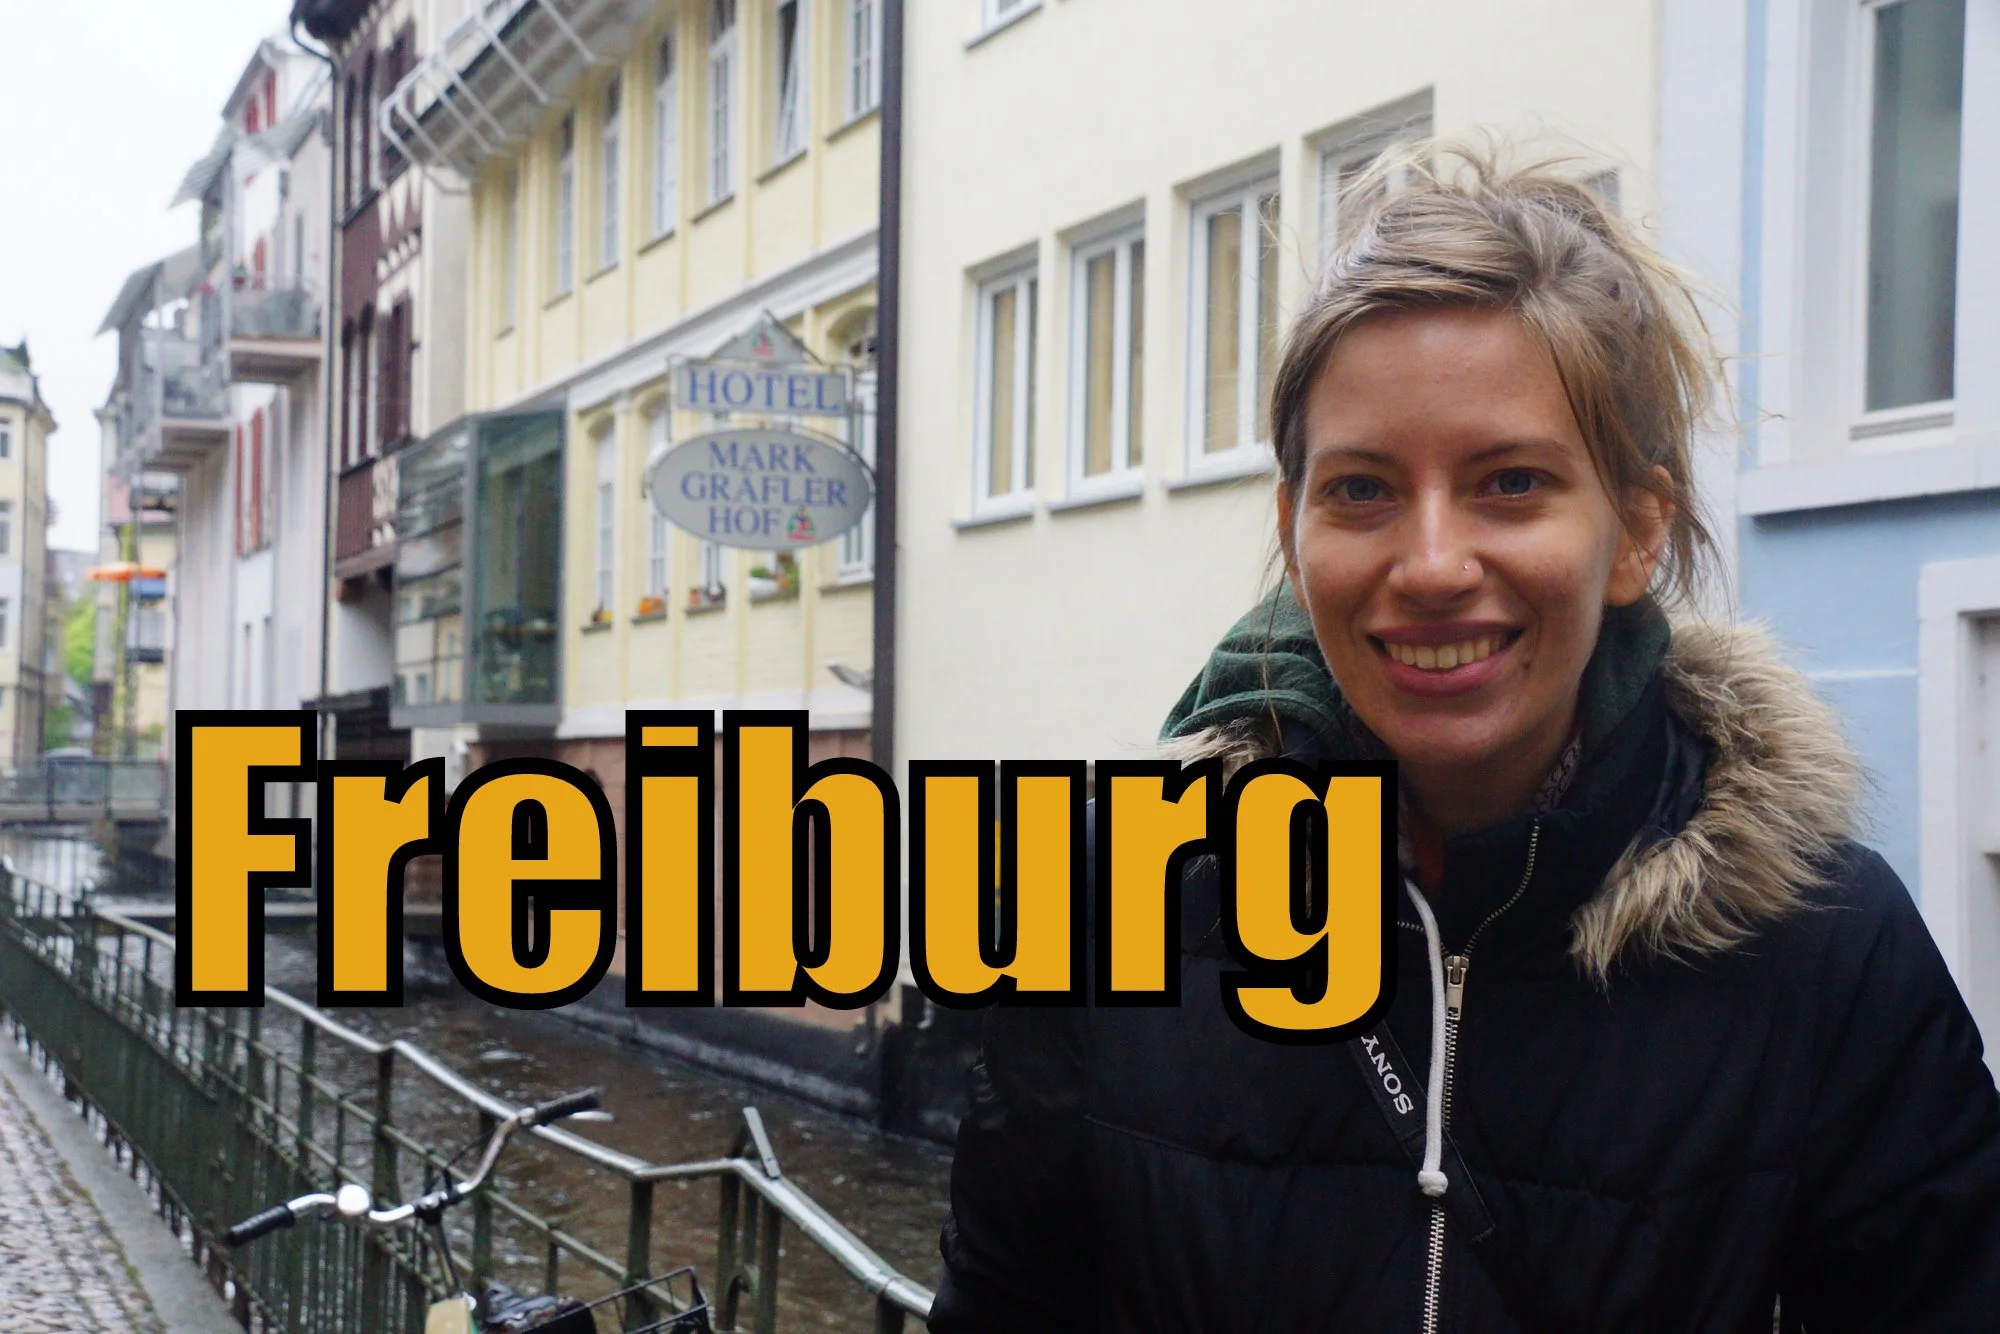 How To Spend One Day Exploring The City Of Freiburg, Germany